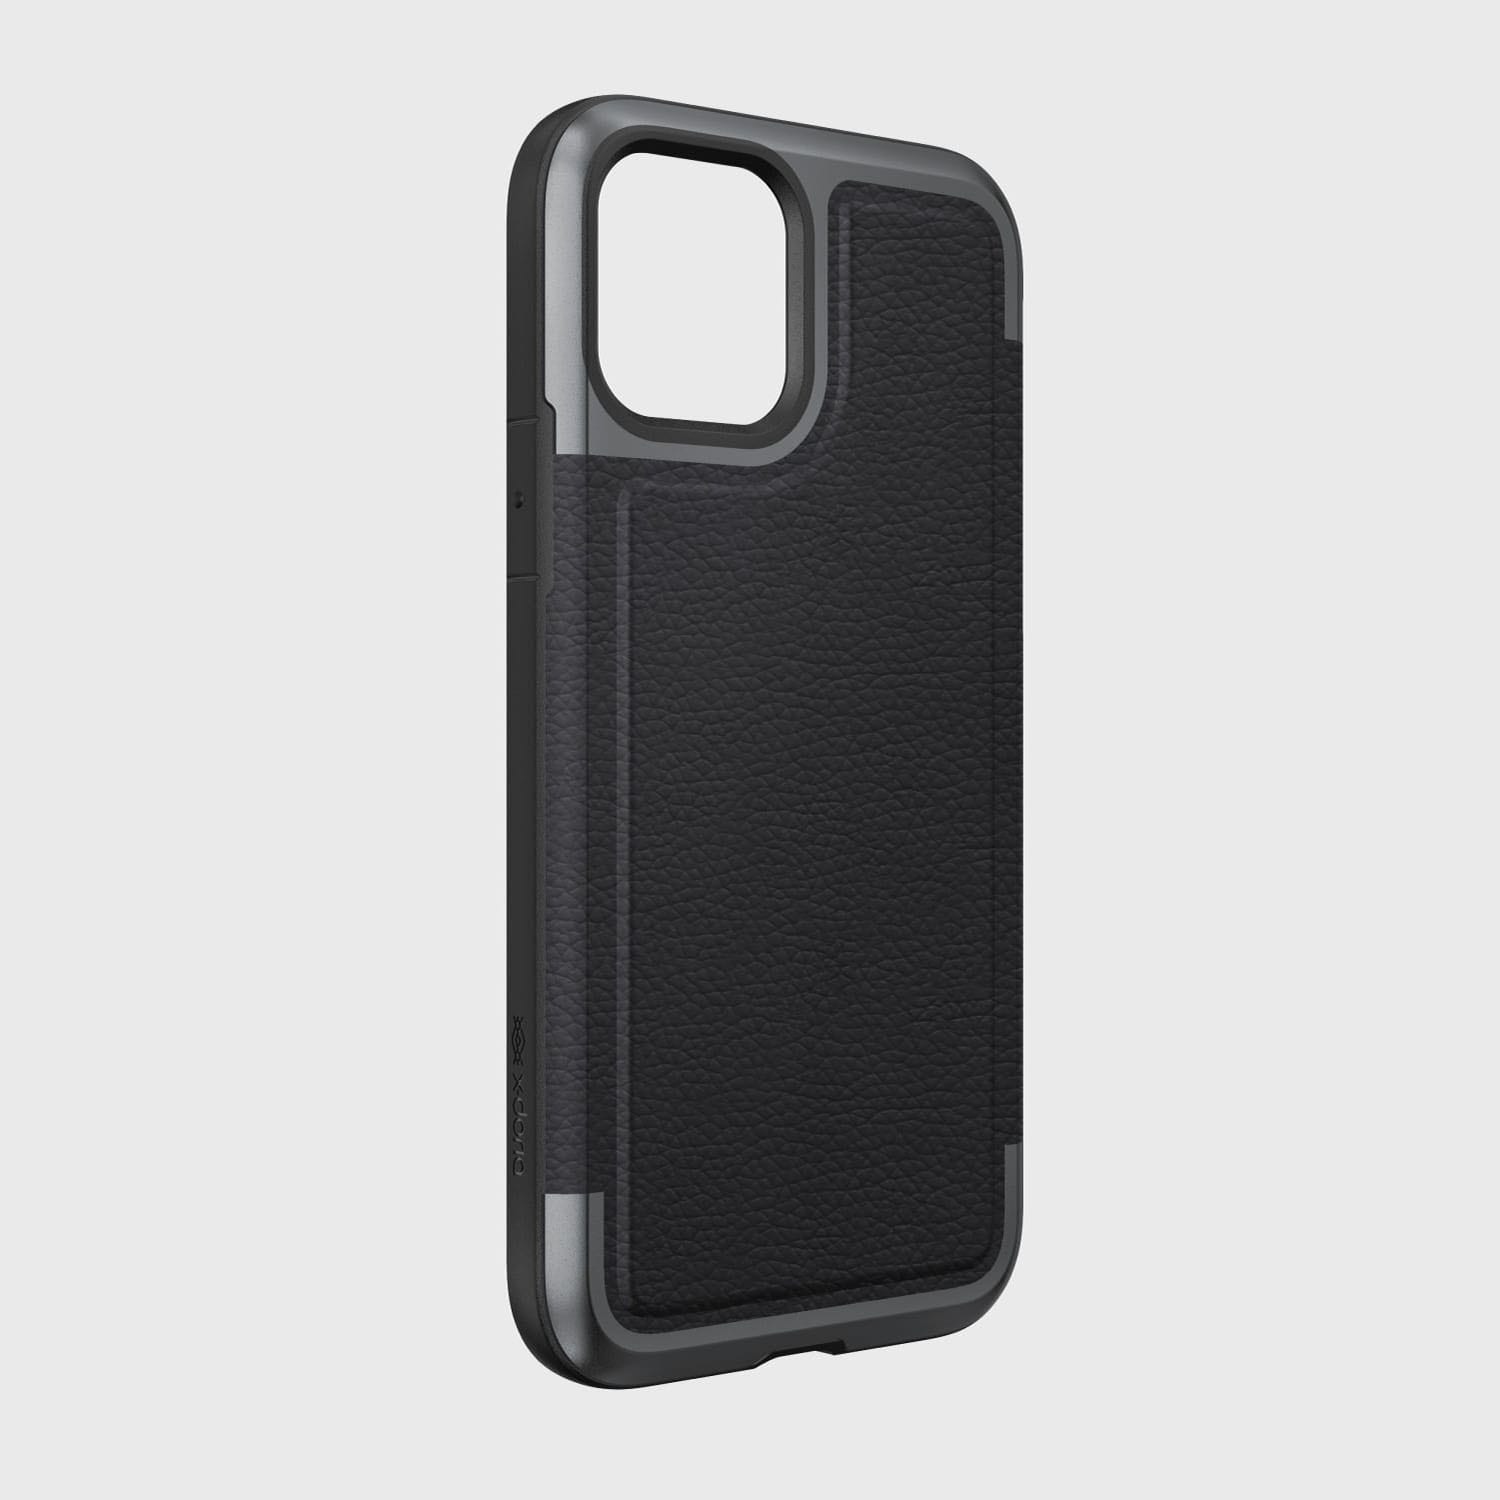 A protective black leather case for the iPhone 11 Pro providing drop protection, the Raptic PRIME.